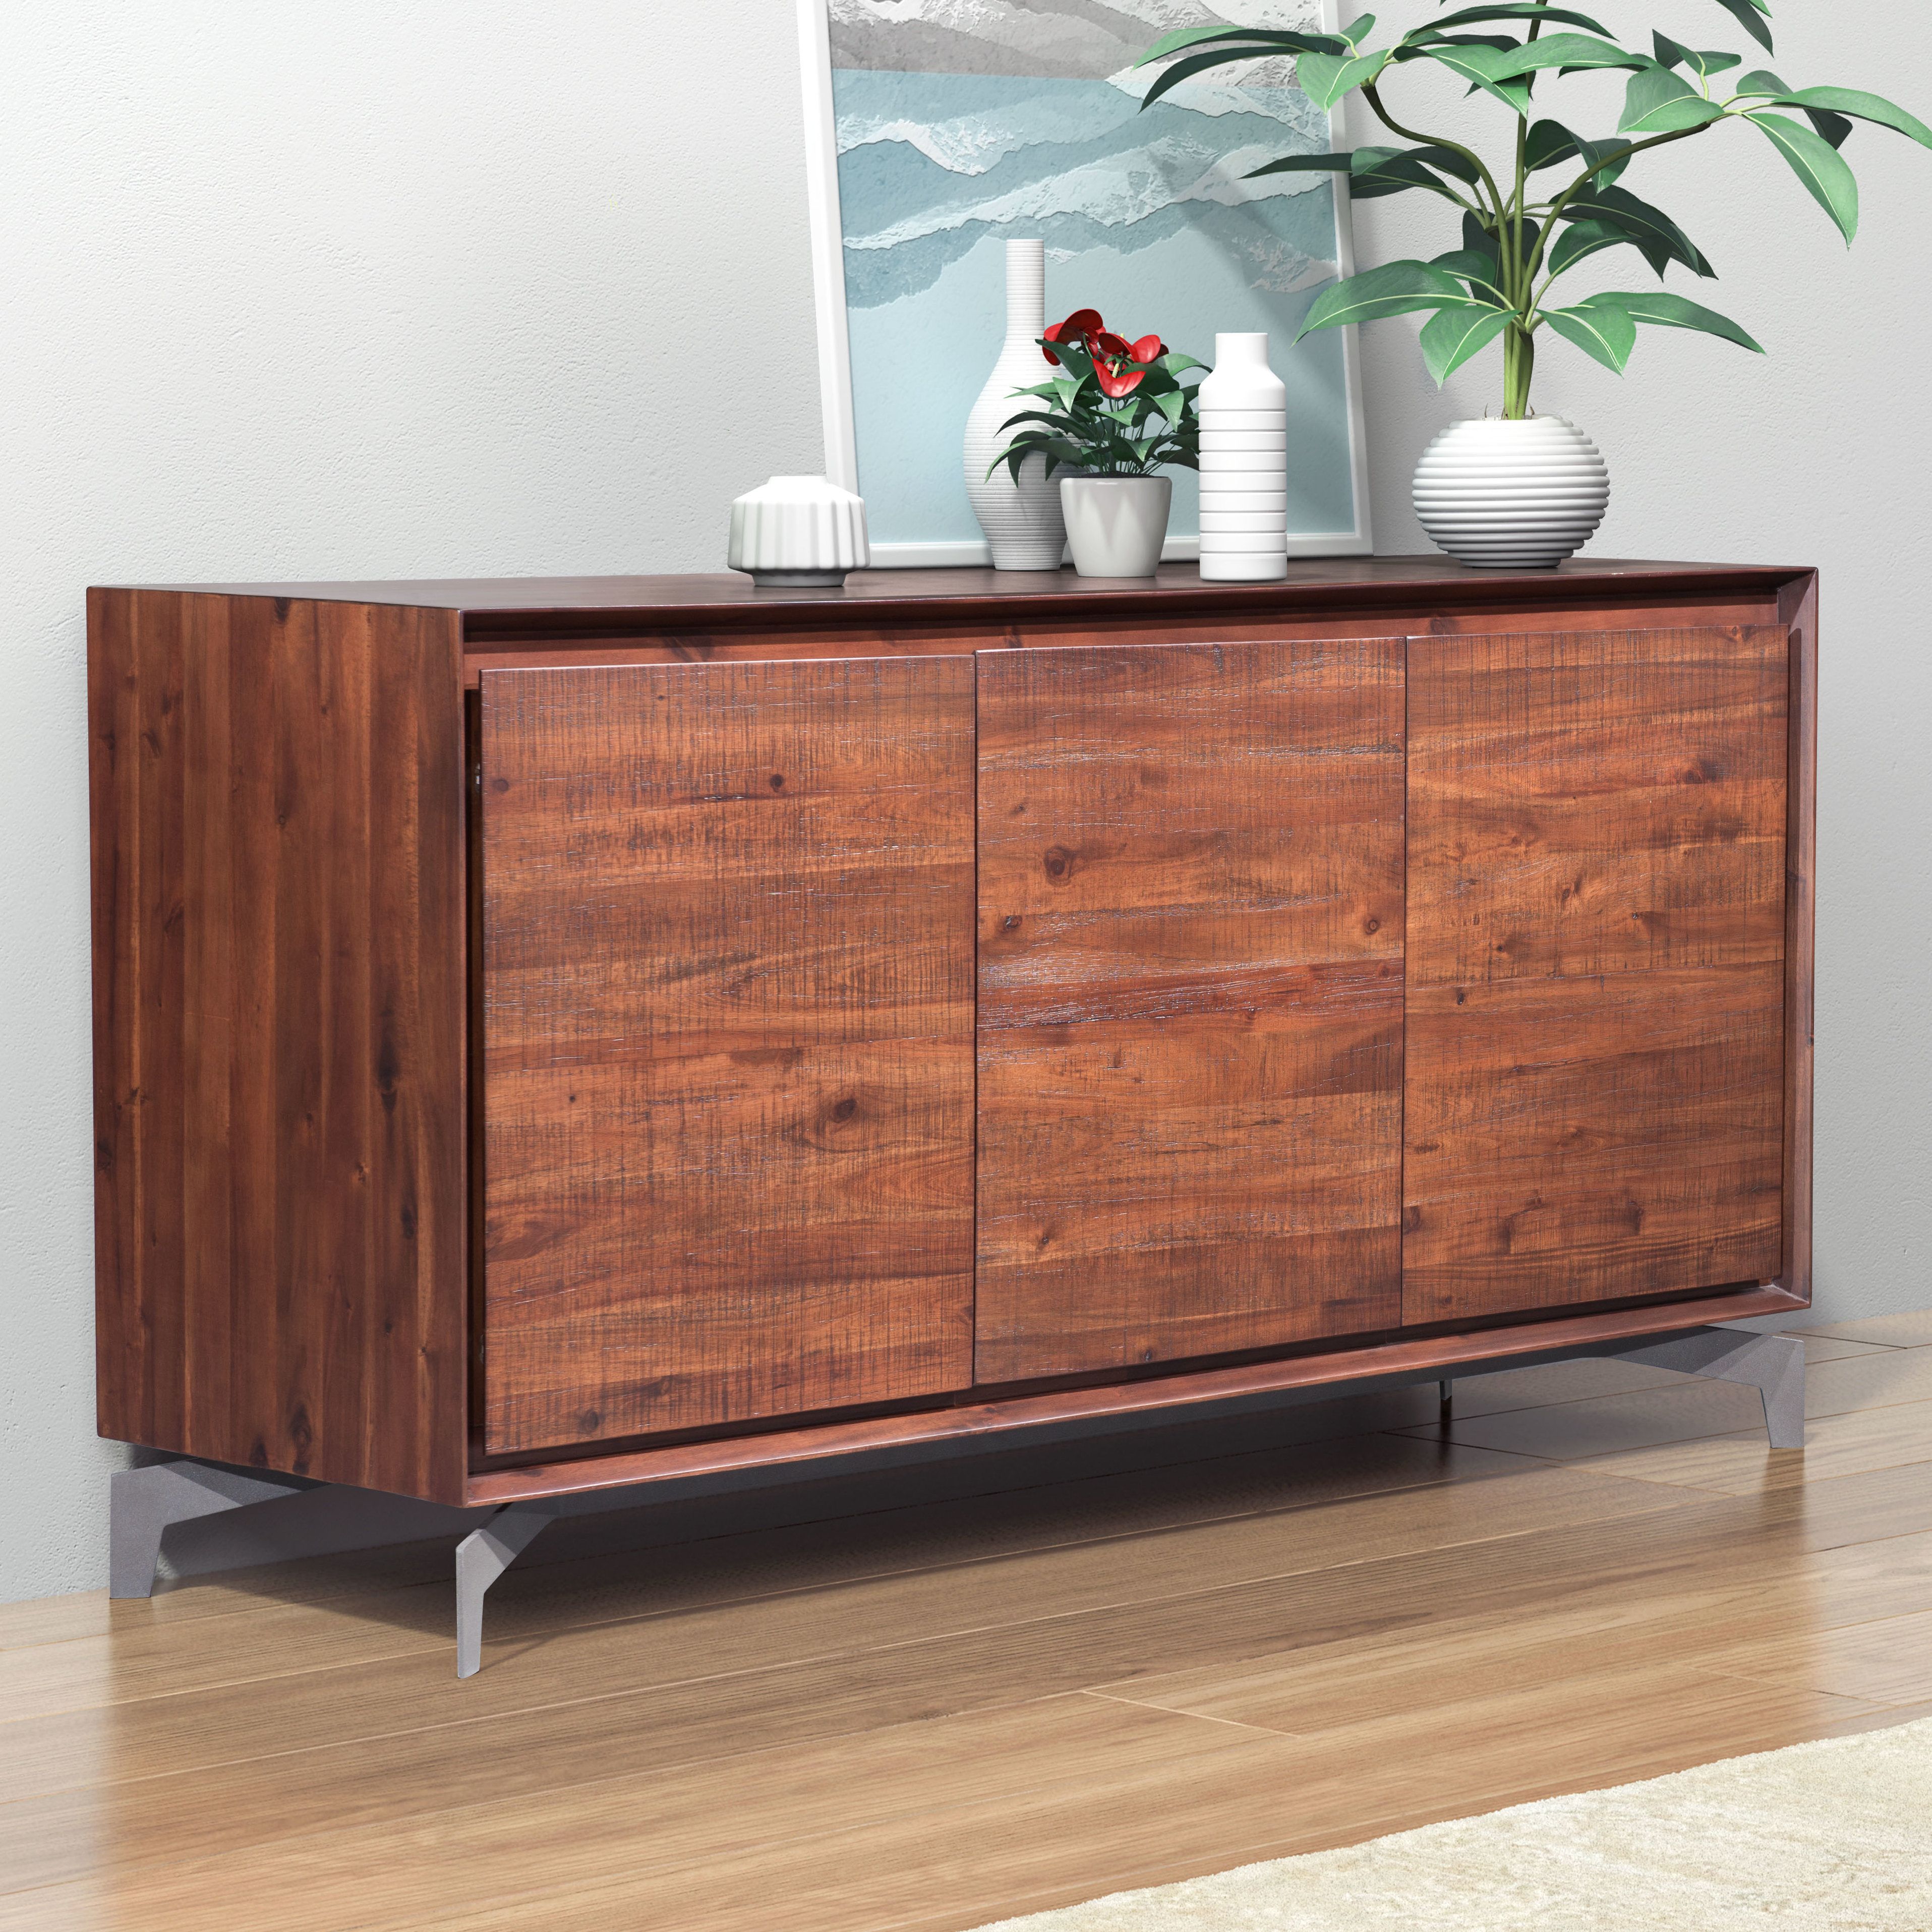 Riggleman Sideboard | Joss & Main In Most Up To Date Remington Sideboards (View 9 of 20)